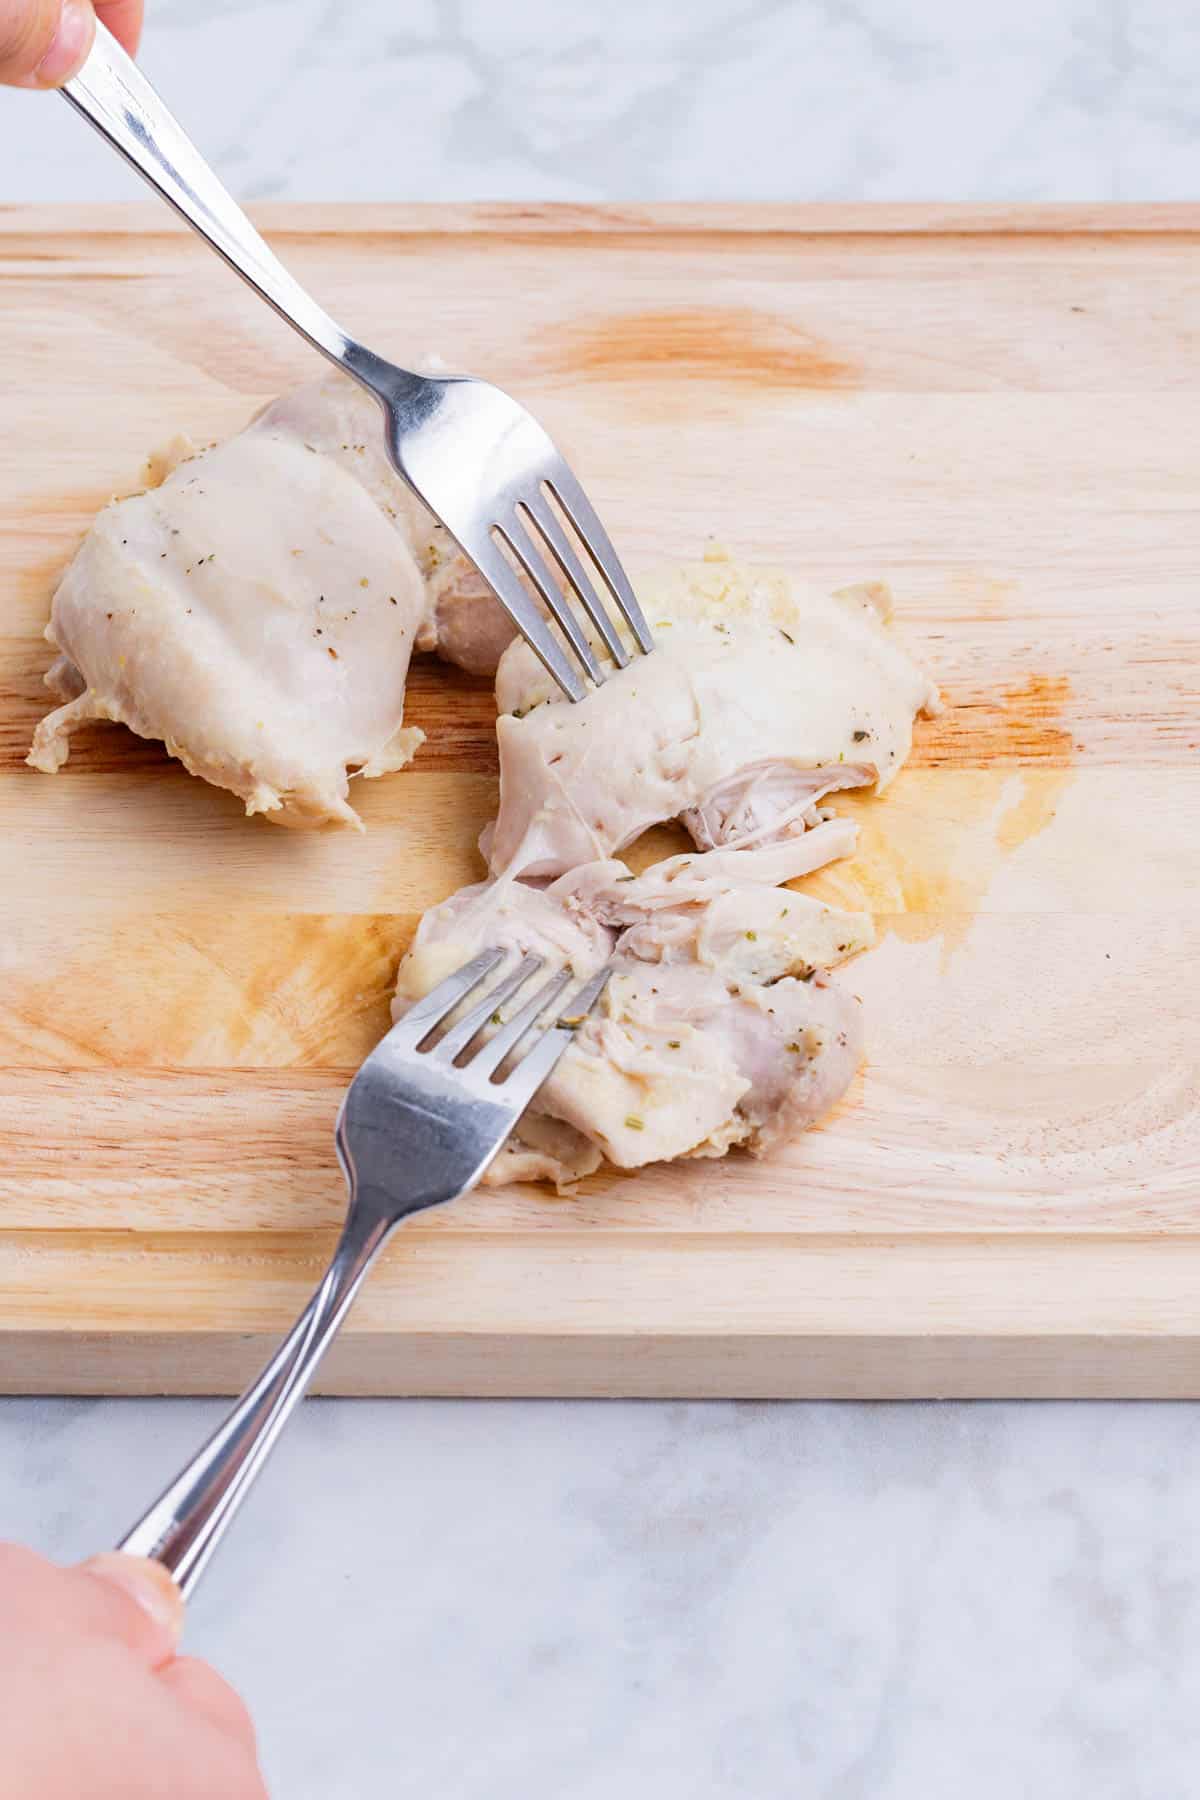 Cooked chicken is shredded before being added back to the dish.